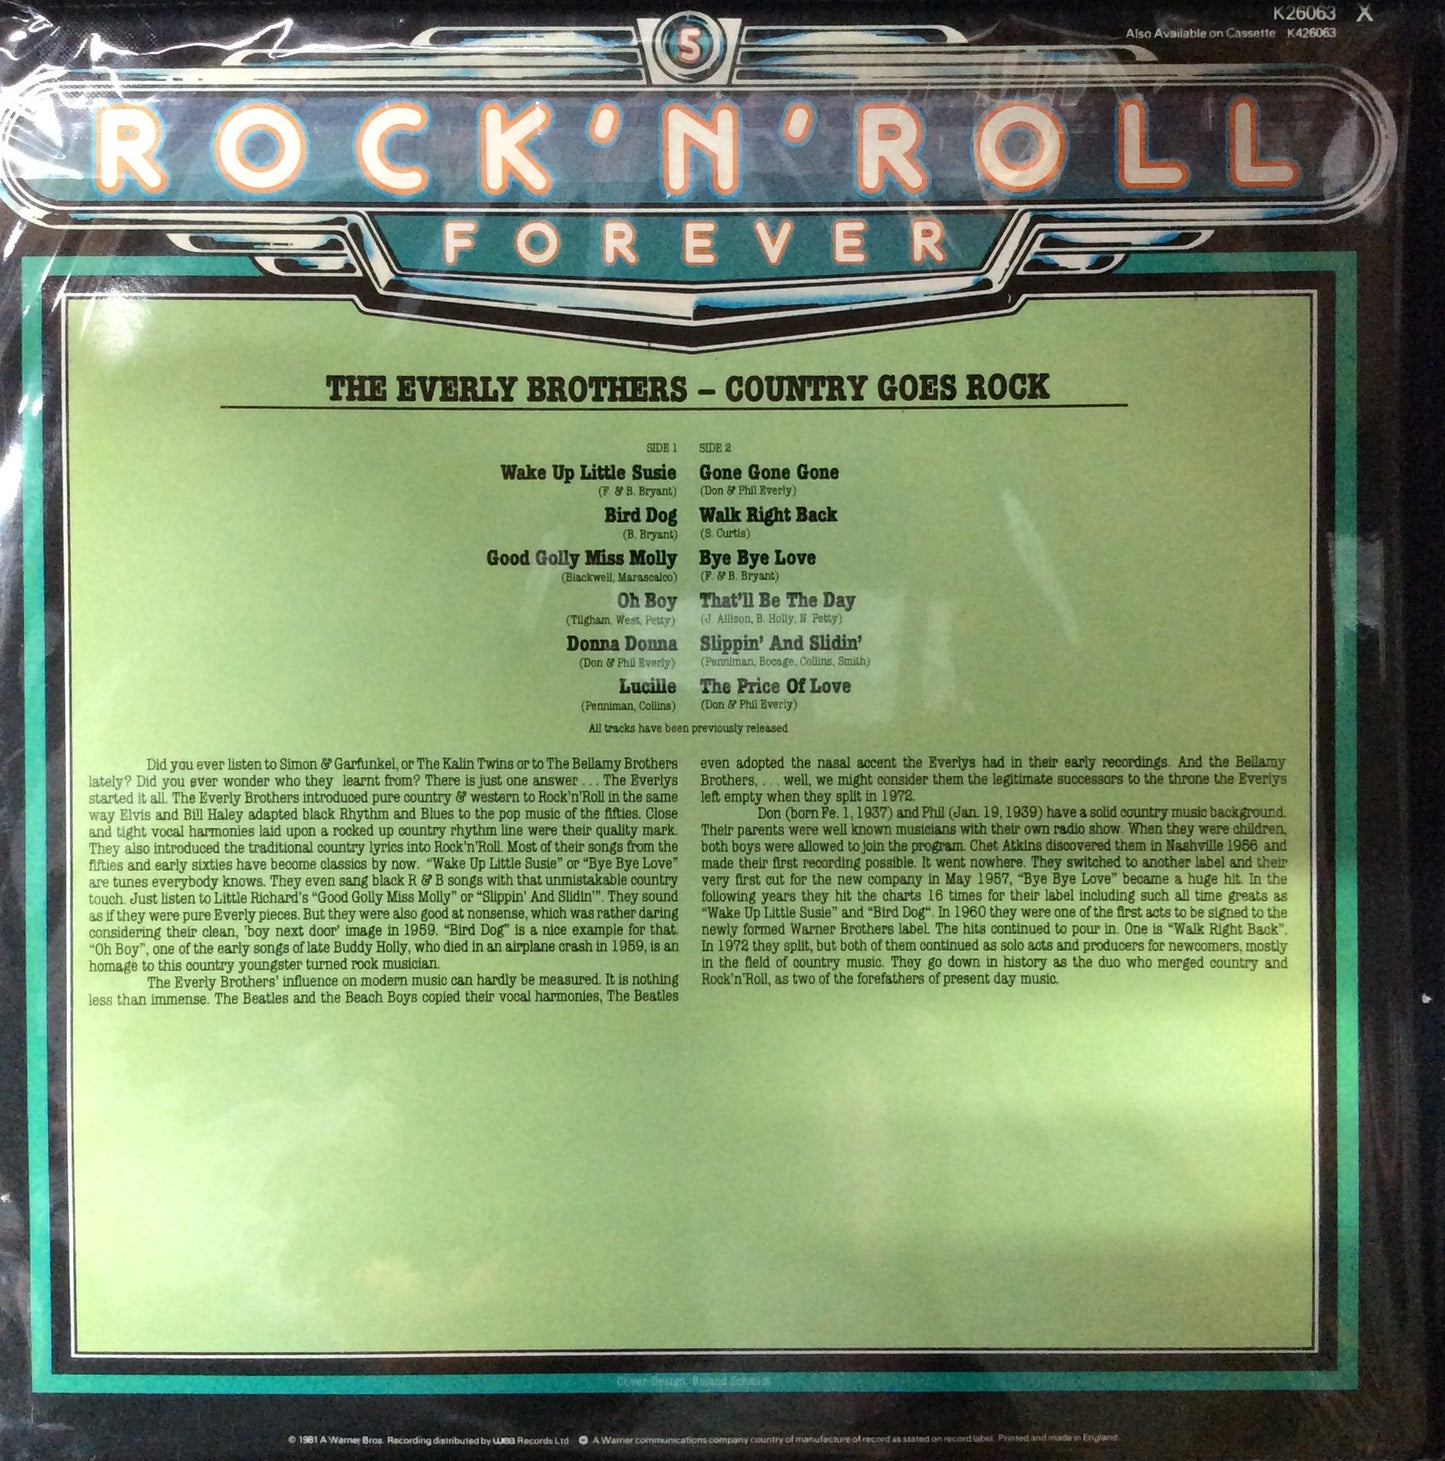 Everly Brothers - Rock 'n' Roll Forever